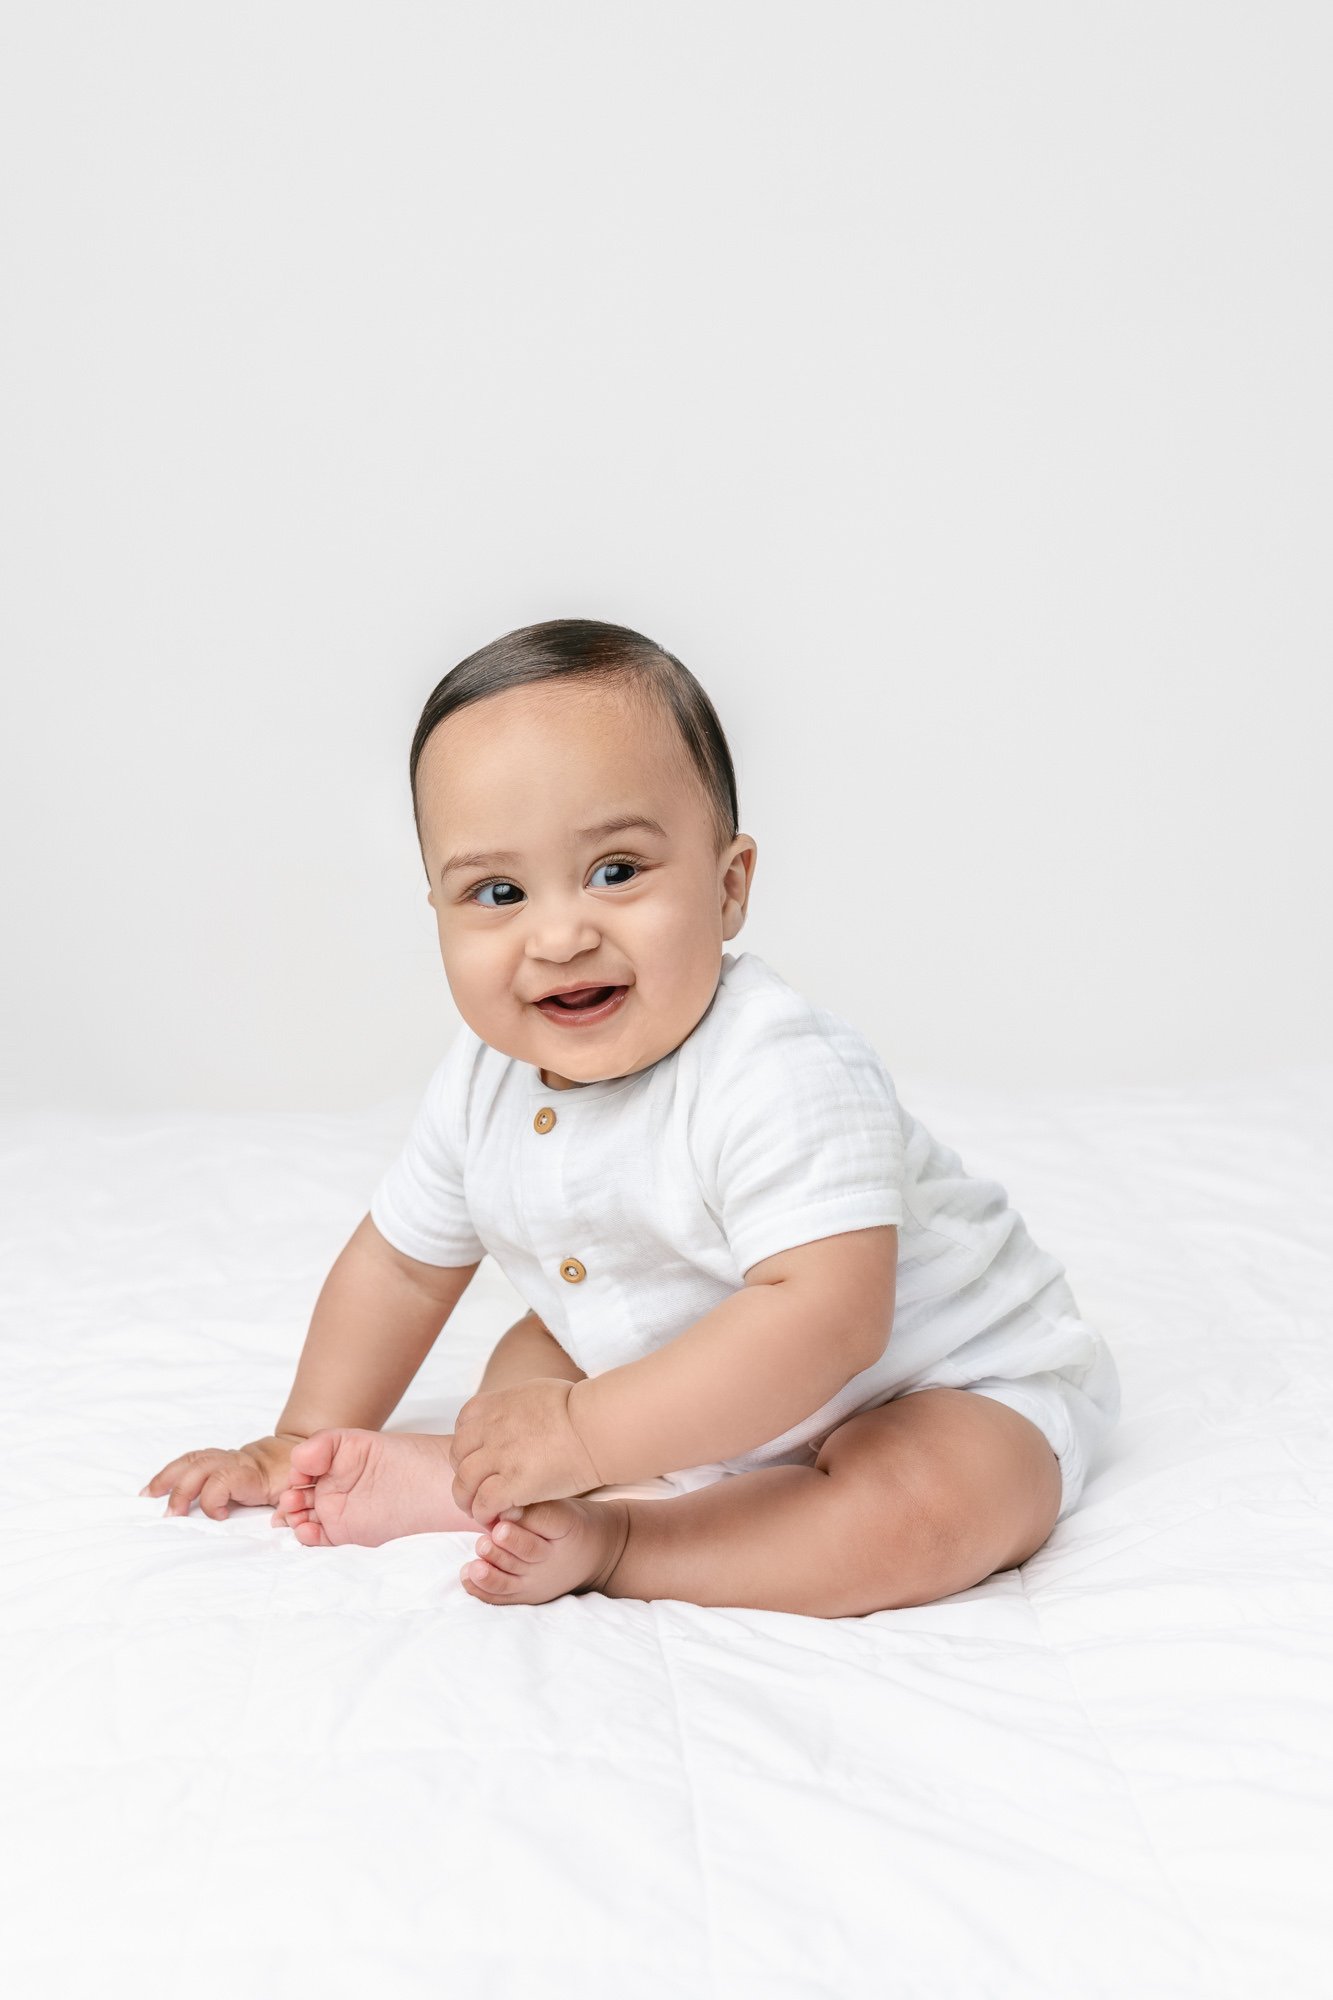  A sitting session is one of the professional sessions you should book for your ever-growing baby, they change so much the first year, so don't miss one moment of them growing up. Sitting milestone document first year #njchildrenphotographer #essexco